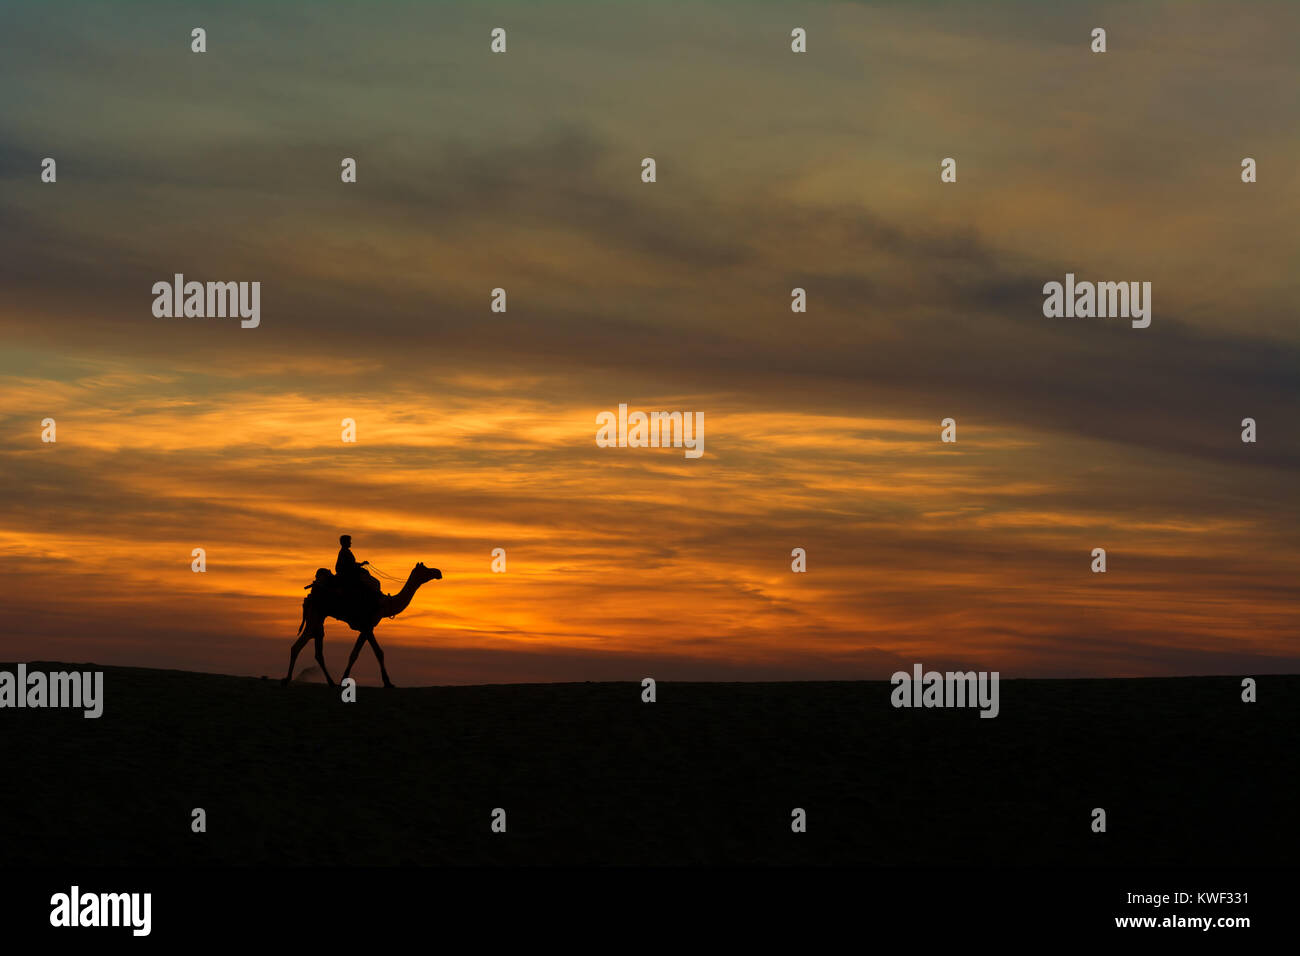 Silhouette of a camel on sand dunes Stock Photo